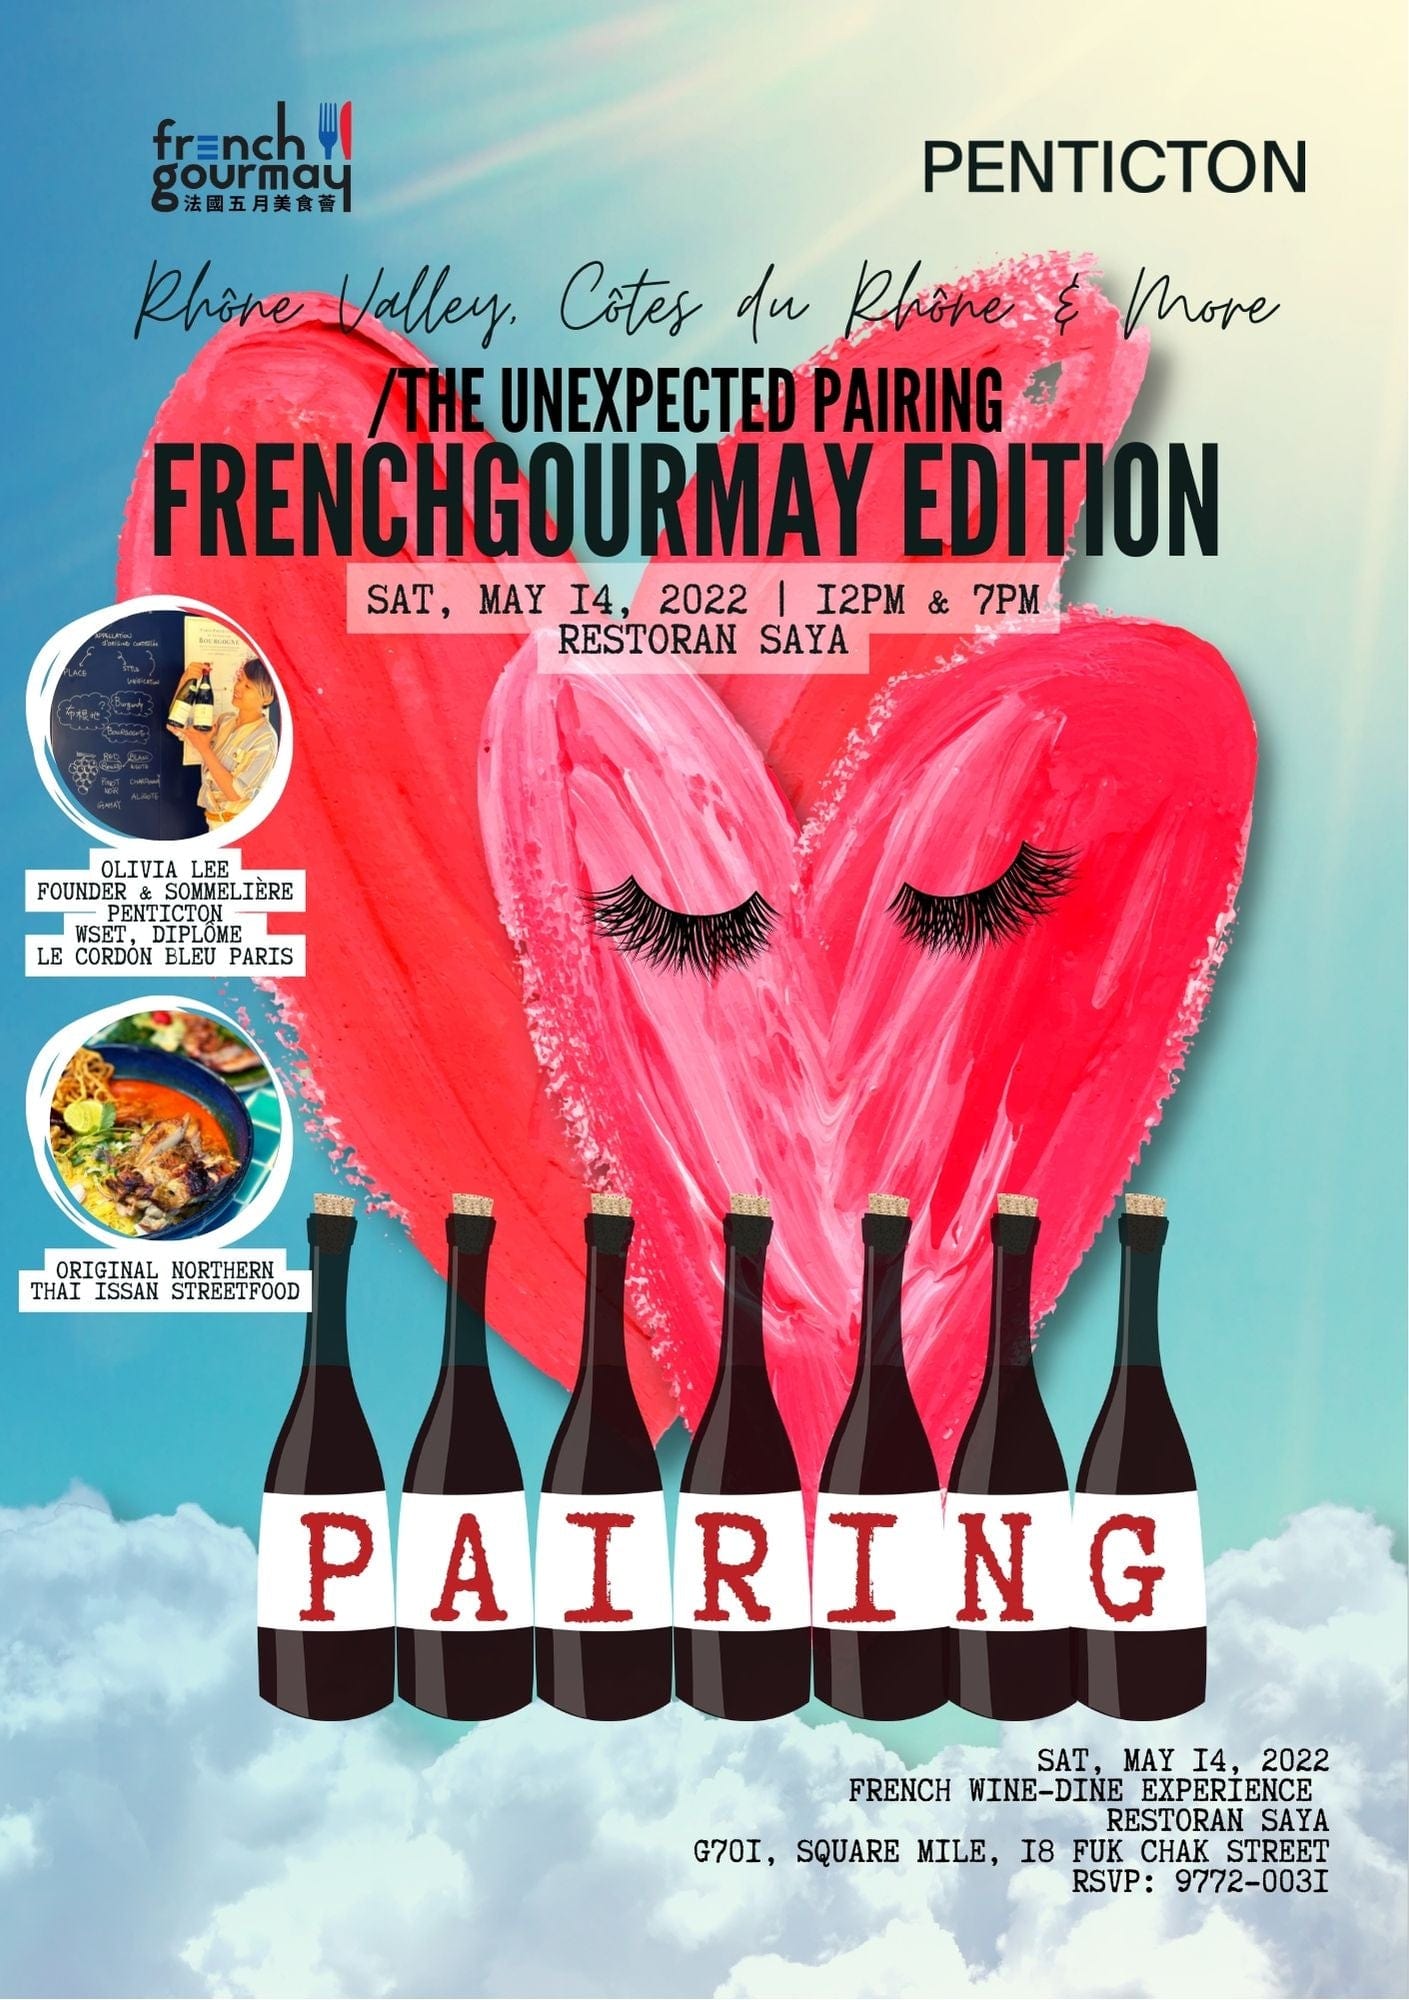 Shop PENTICTON French GourMay Edition Rhone Wine & More Wine Pairing【尋味法國】泰國依善料理 X Rhone Valley & More 餐酒會 online at PENTICTON artisanal French wine store in Hong Kong. Discover other French wines, promotions, workshops and featured offers at pentictonpacific.com 